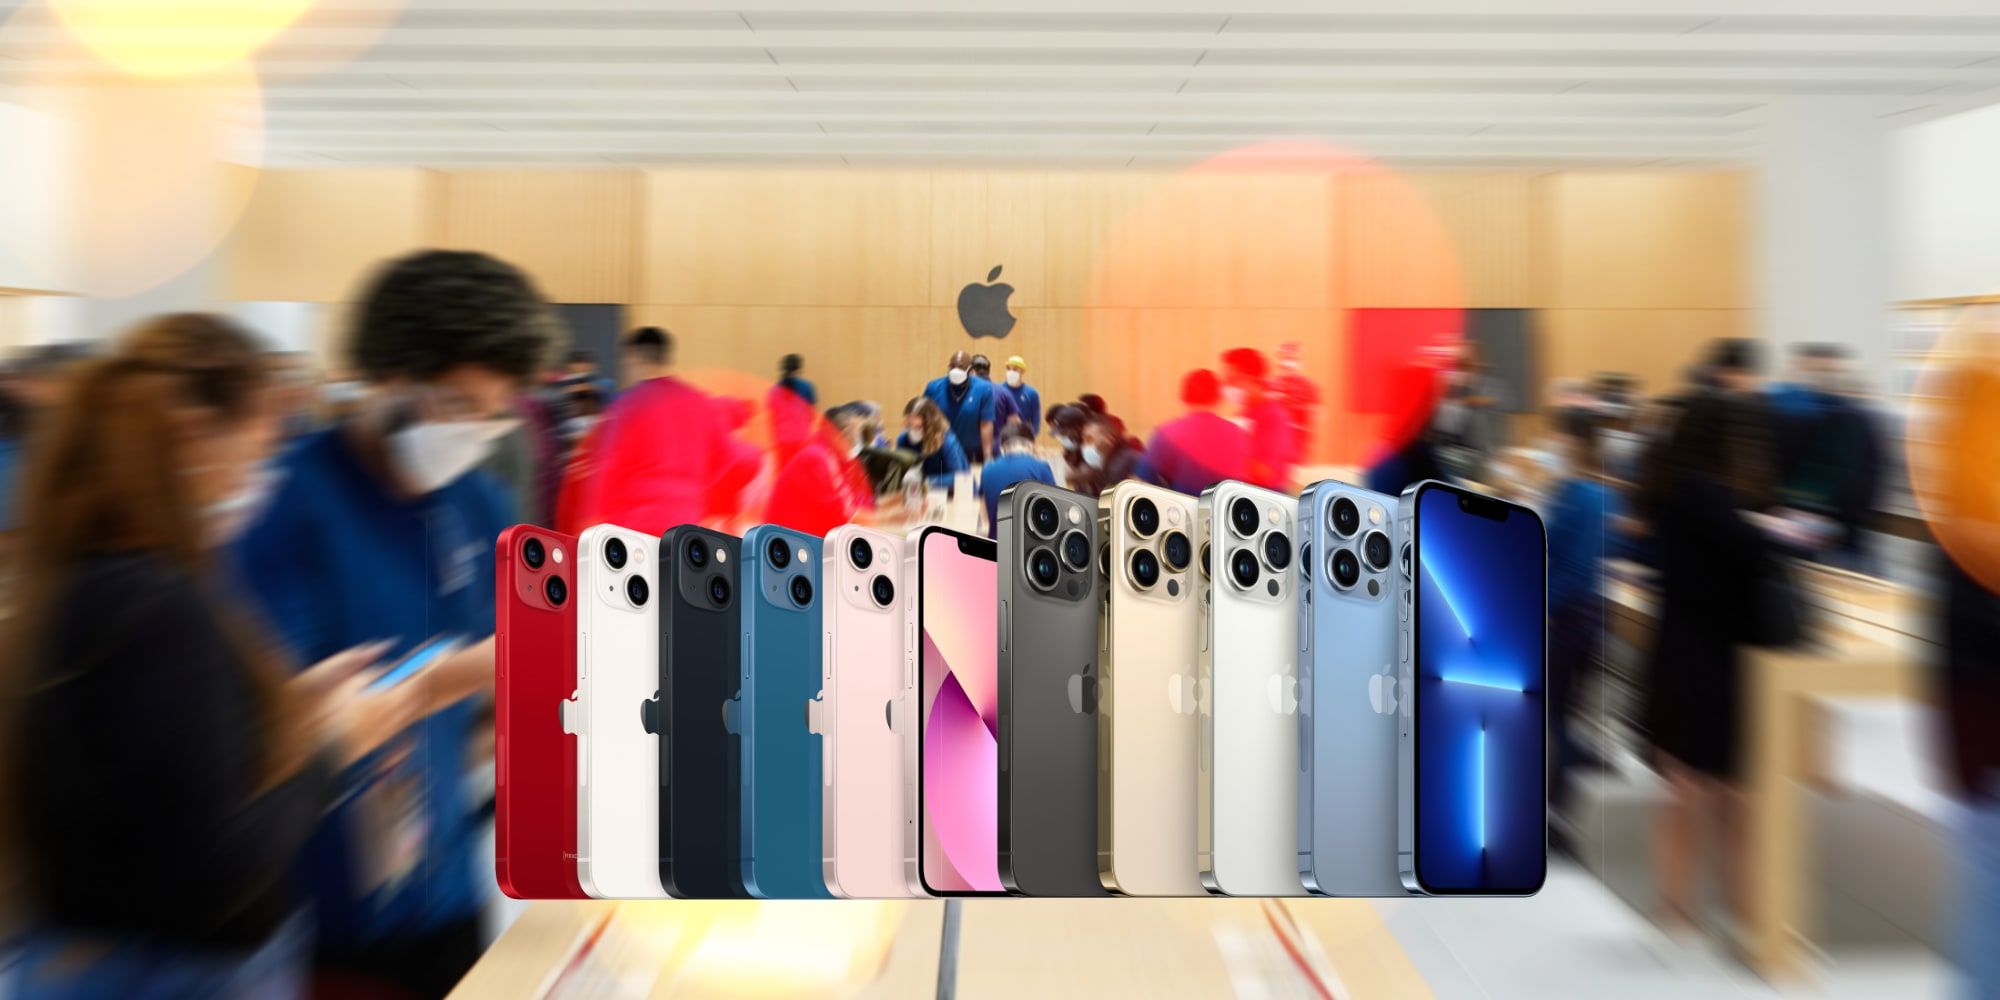 Apple iPhone 13 And 13 Pro Lineup Overlaid on Apple Store Interiror